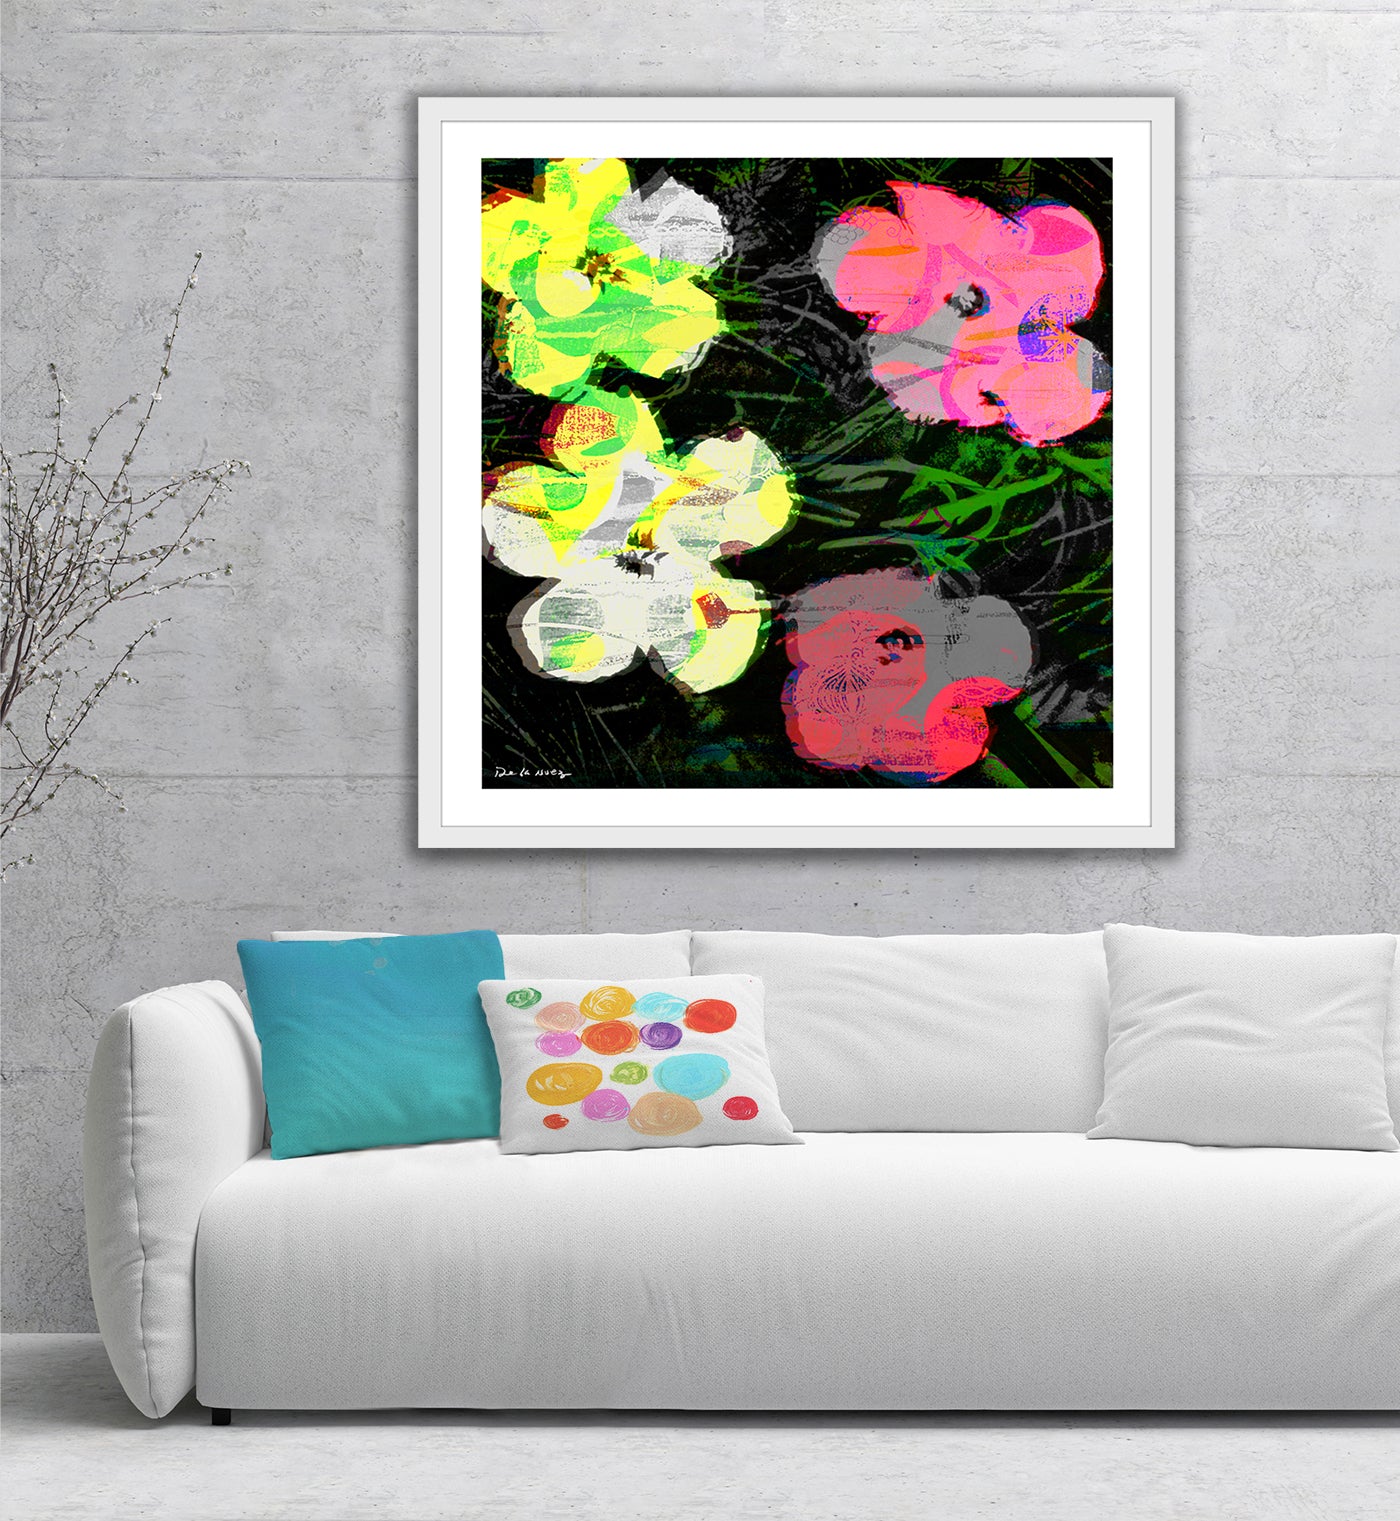 Flower Power; Neon Blooms Mixed Media - FRAMED, Signed